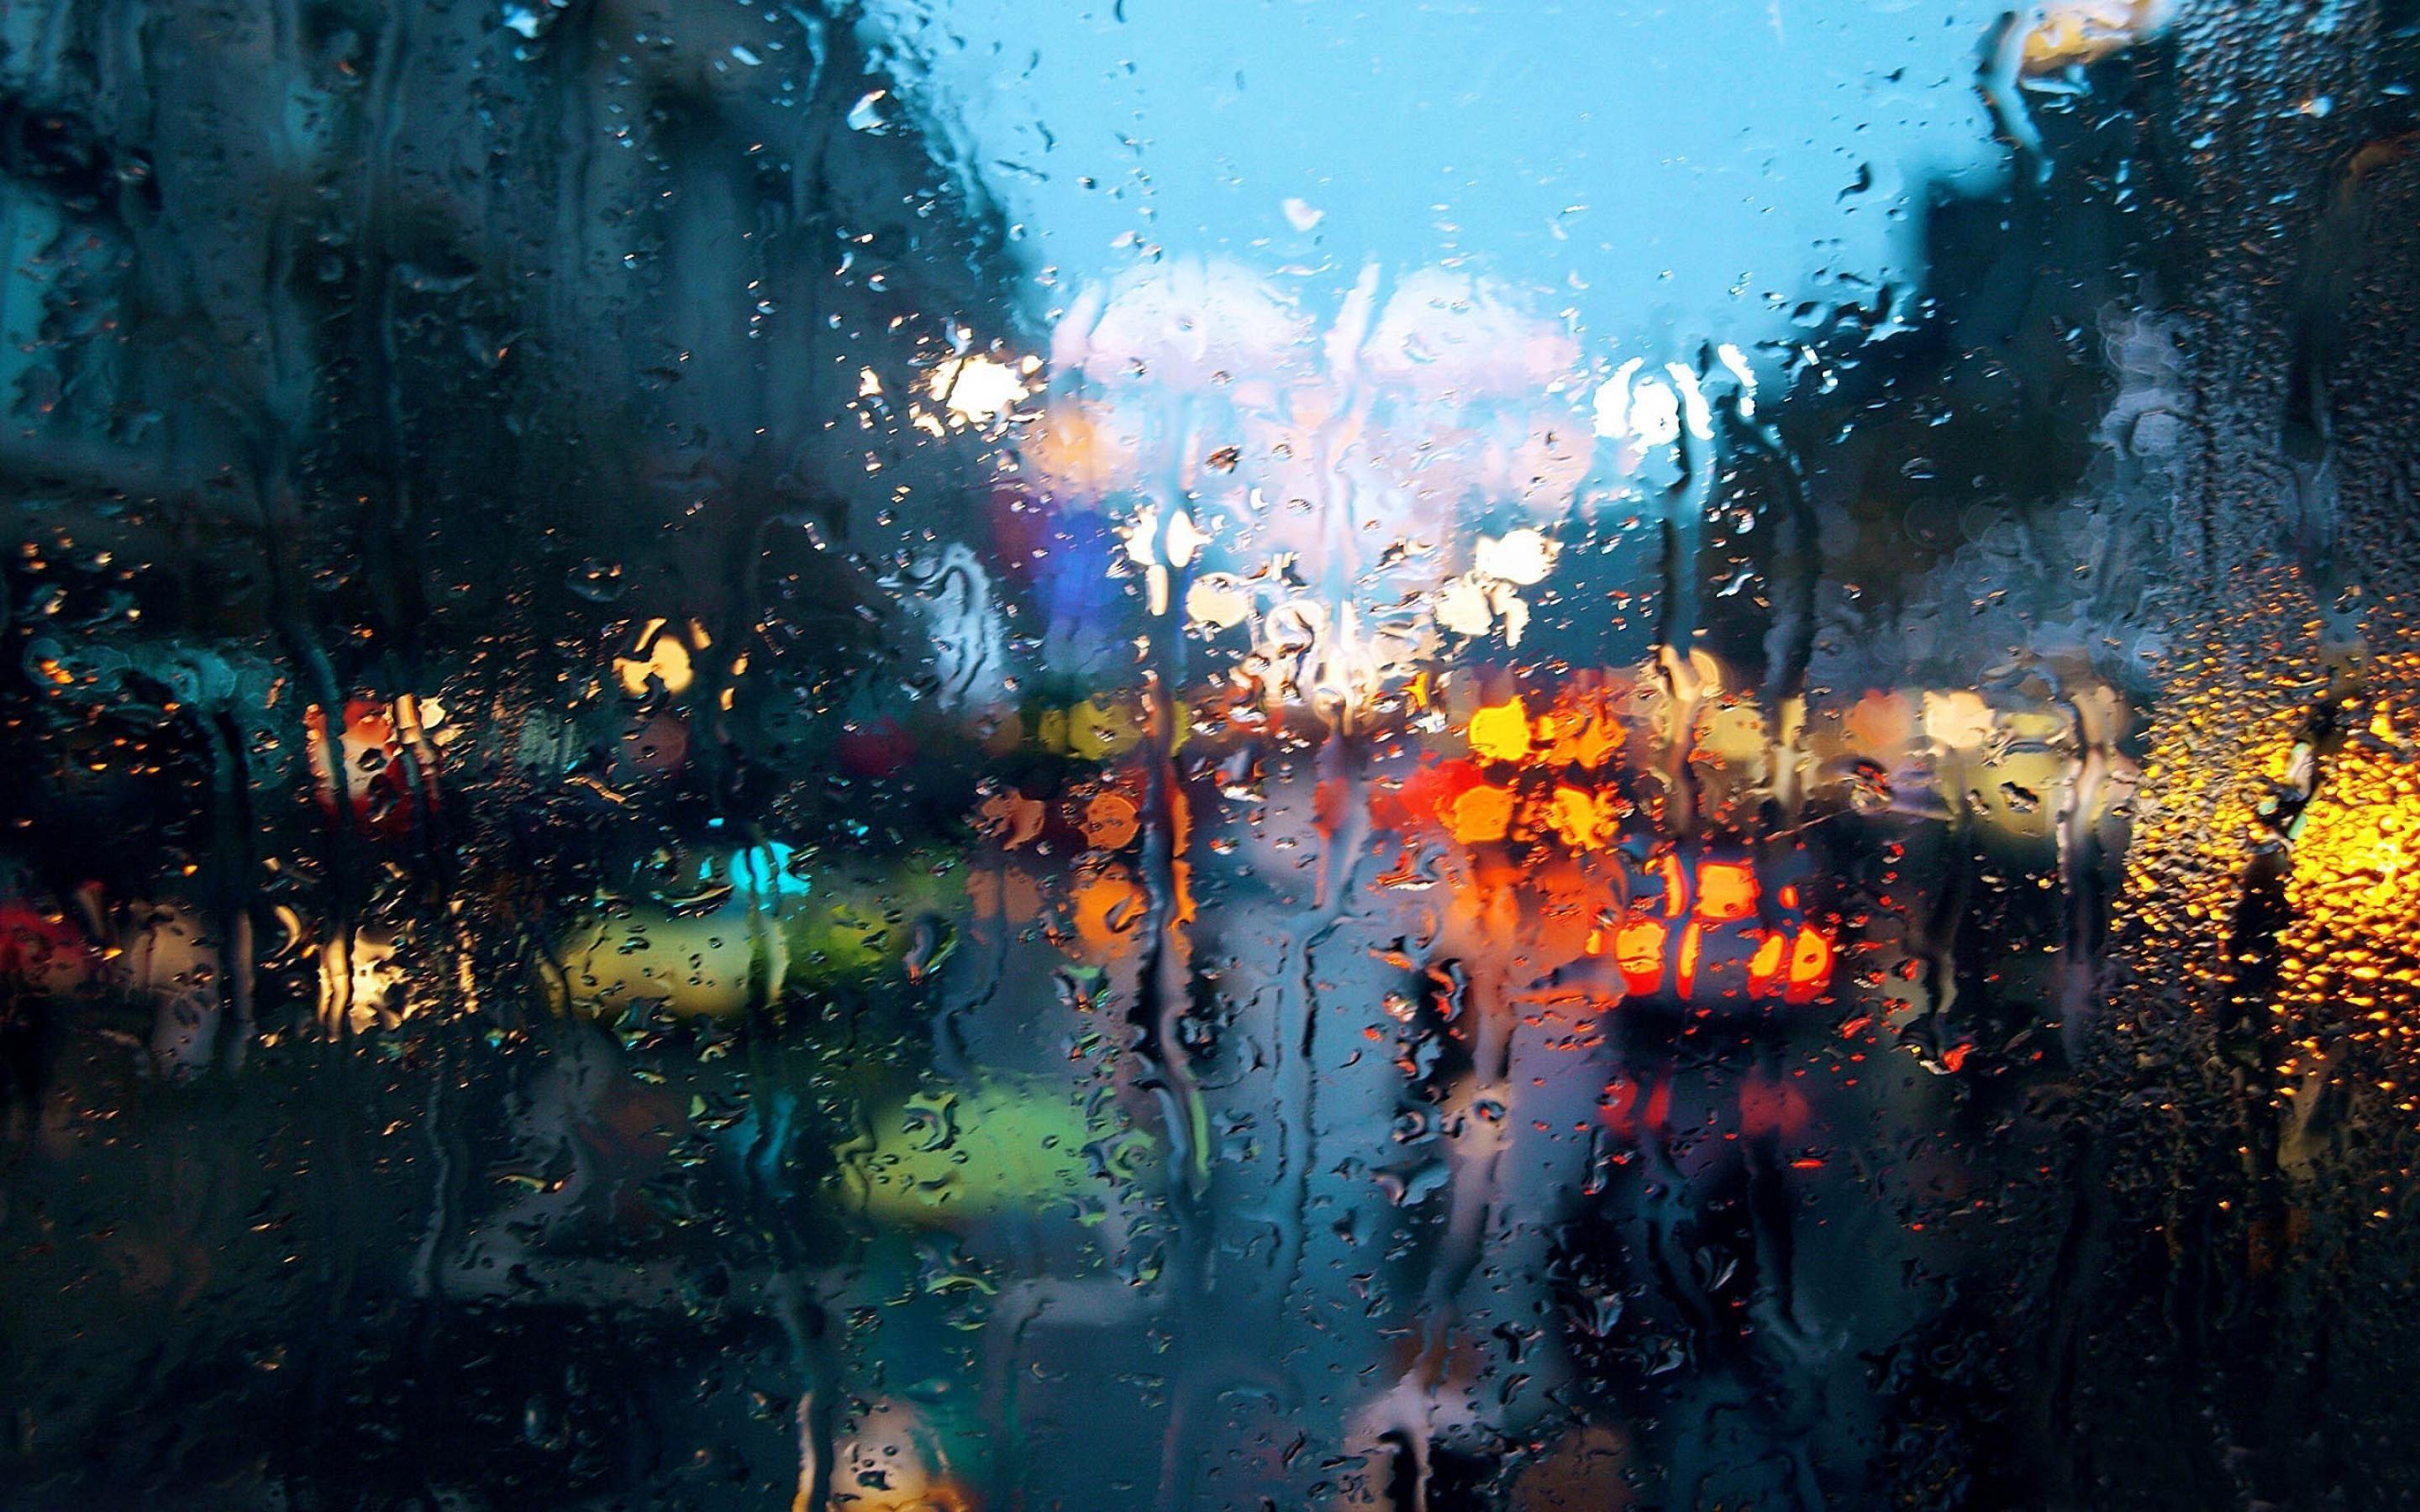 rain city. Rainy city wallpaper and image wallpaper, picture. Love photography, Art photography, Picture